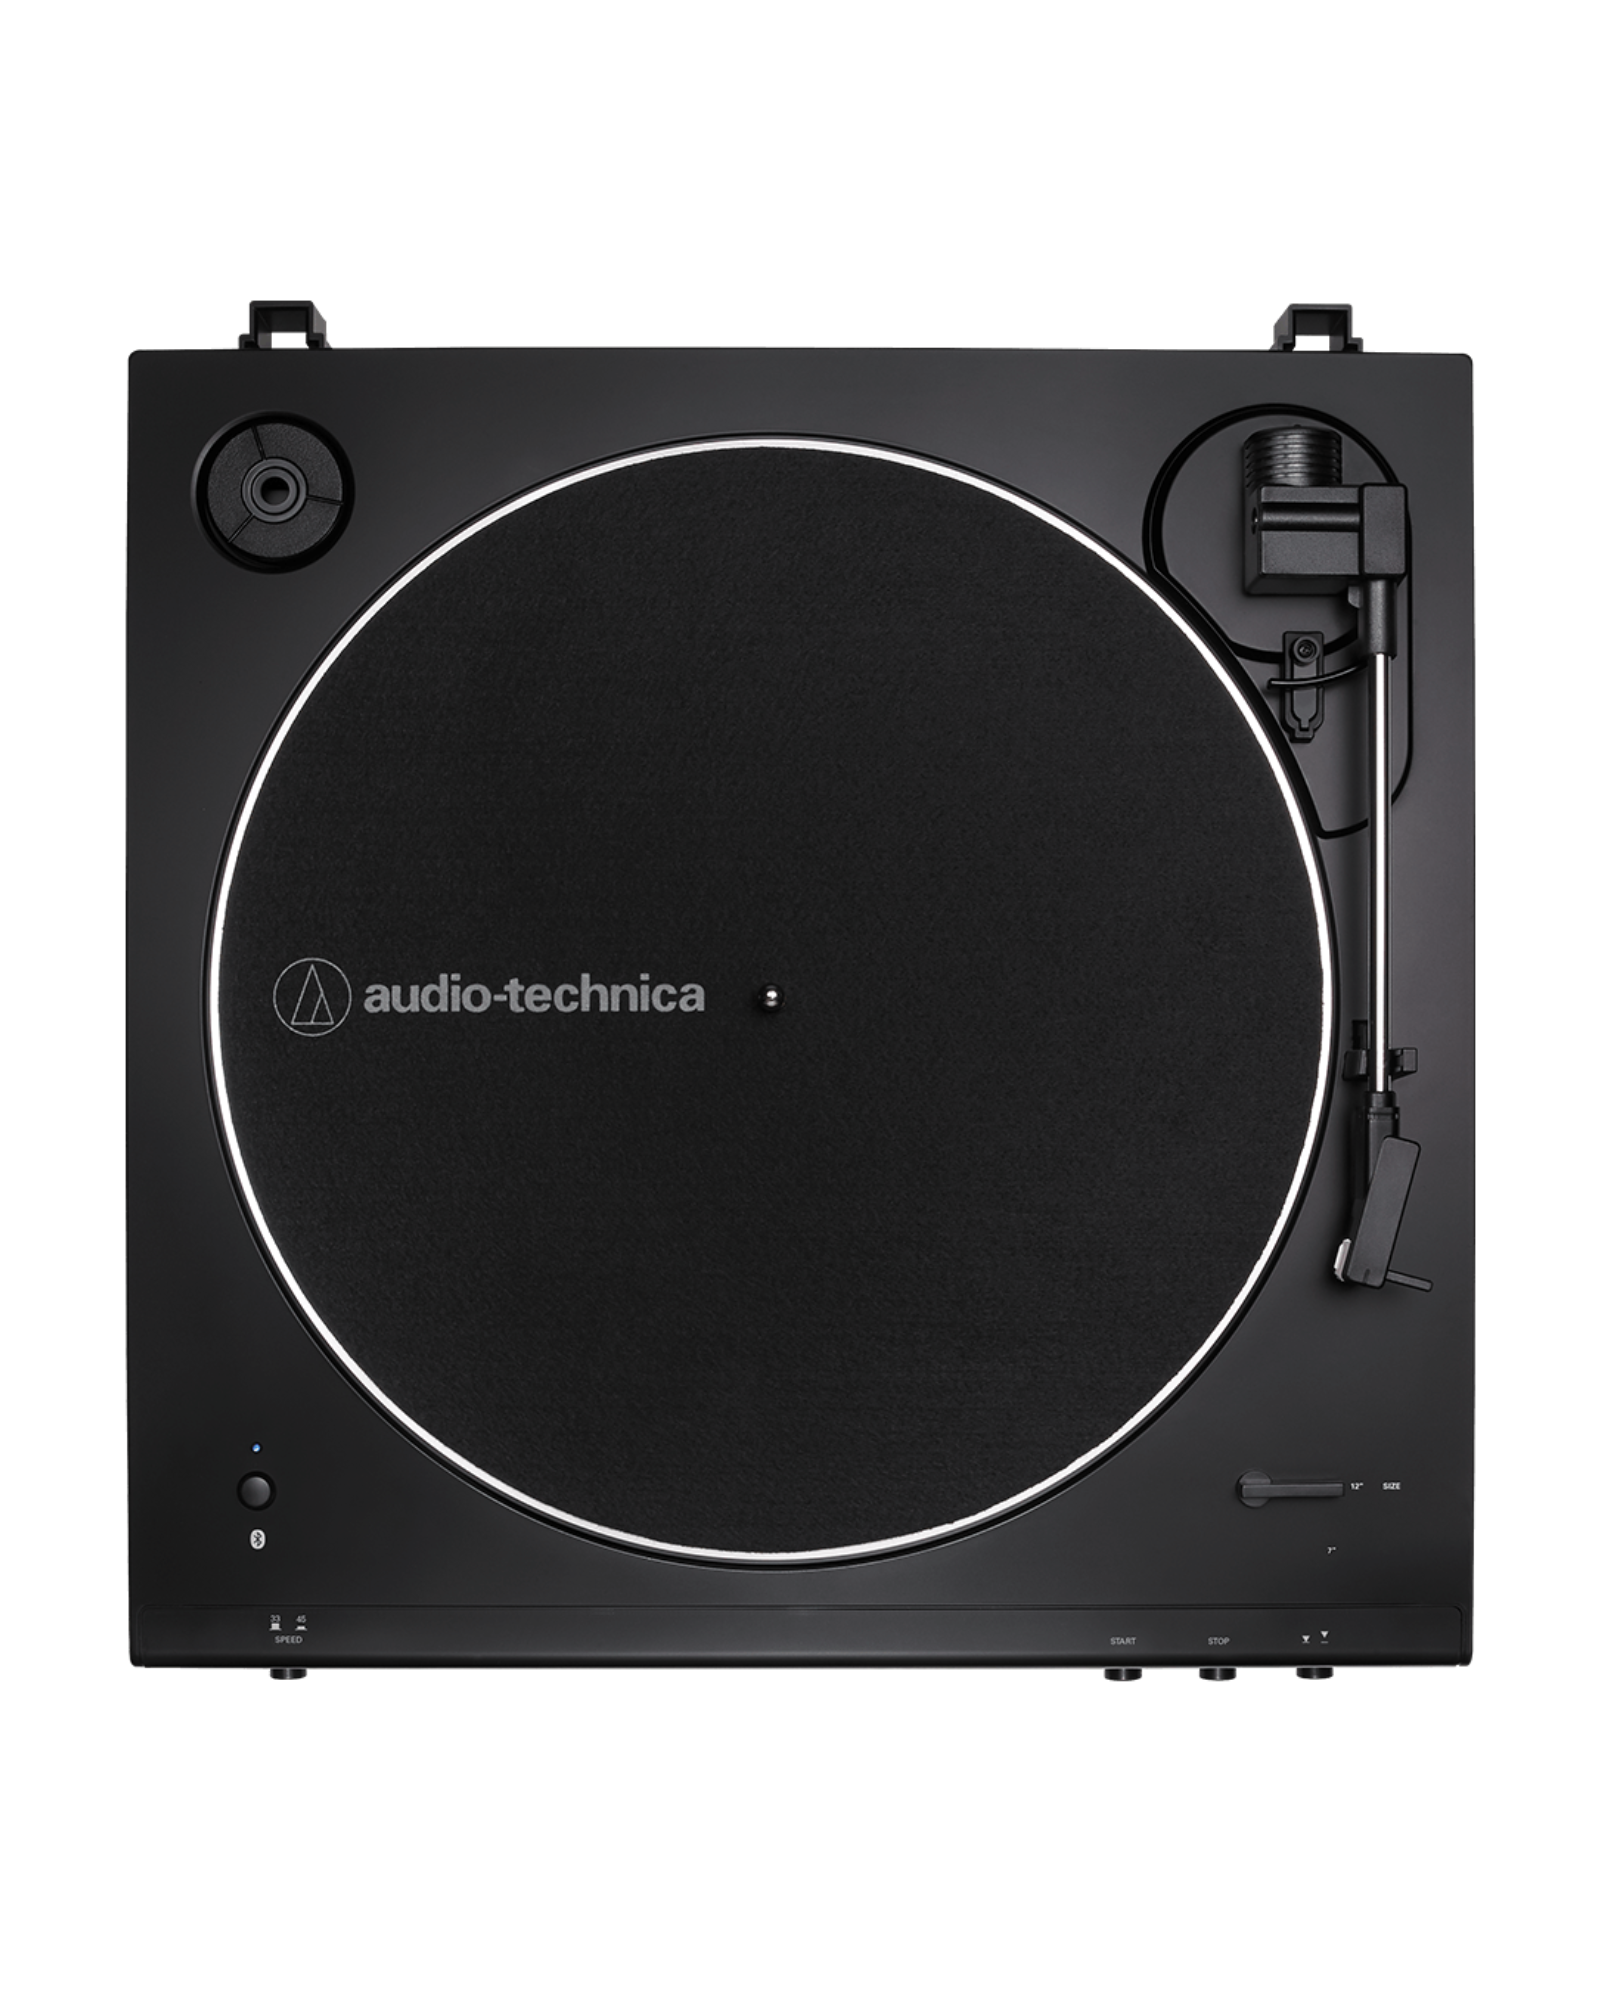 FULLY AUTOMATIC WIRELESS BELT-DRIVE - TURNTABLE